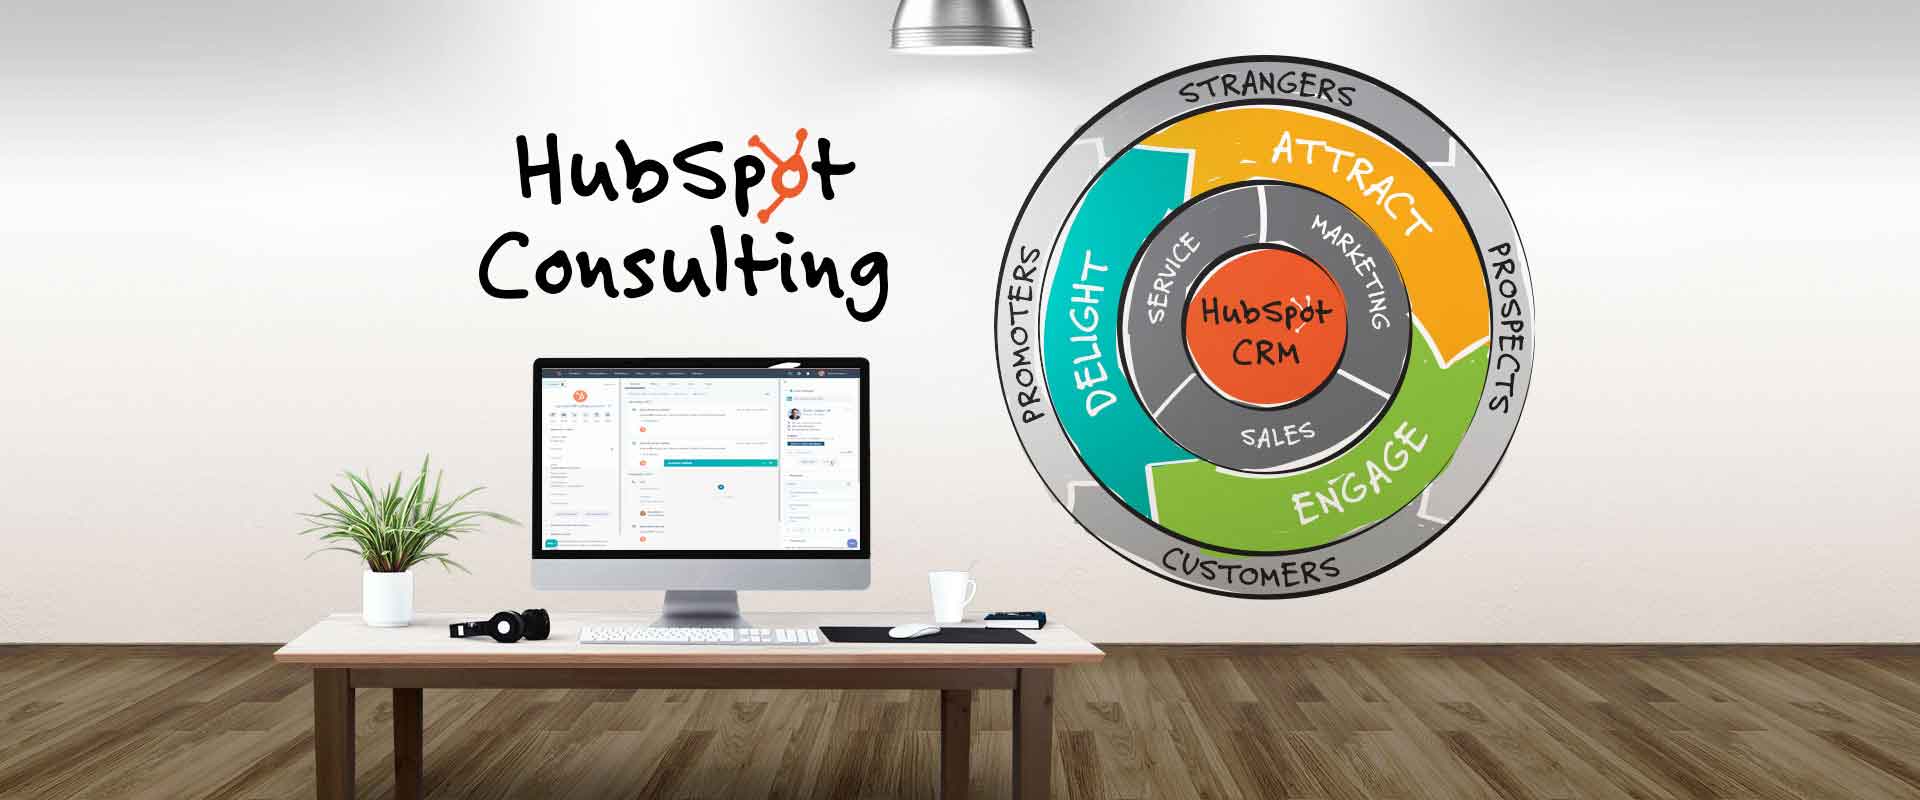 HubSpot-Consulting-Banner